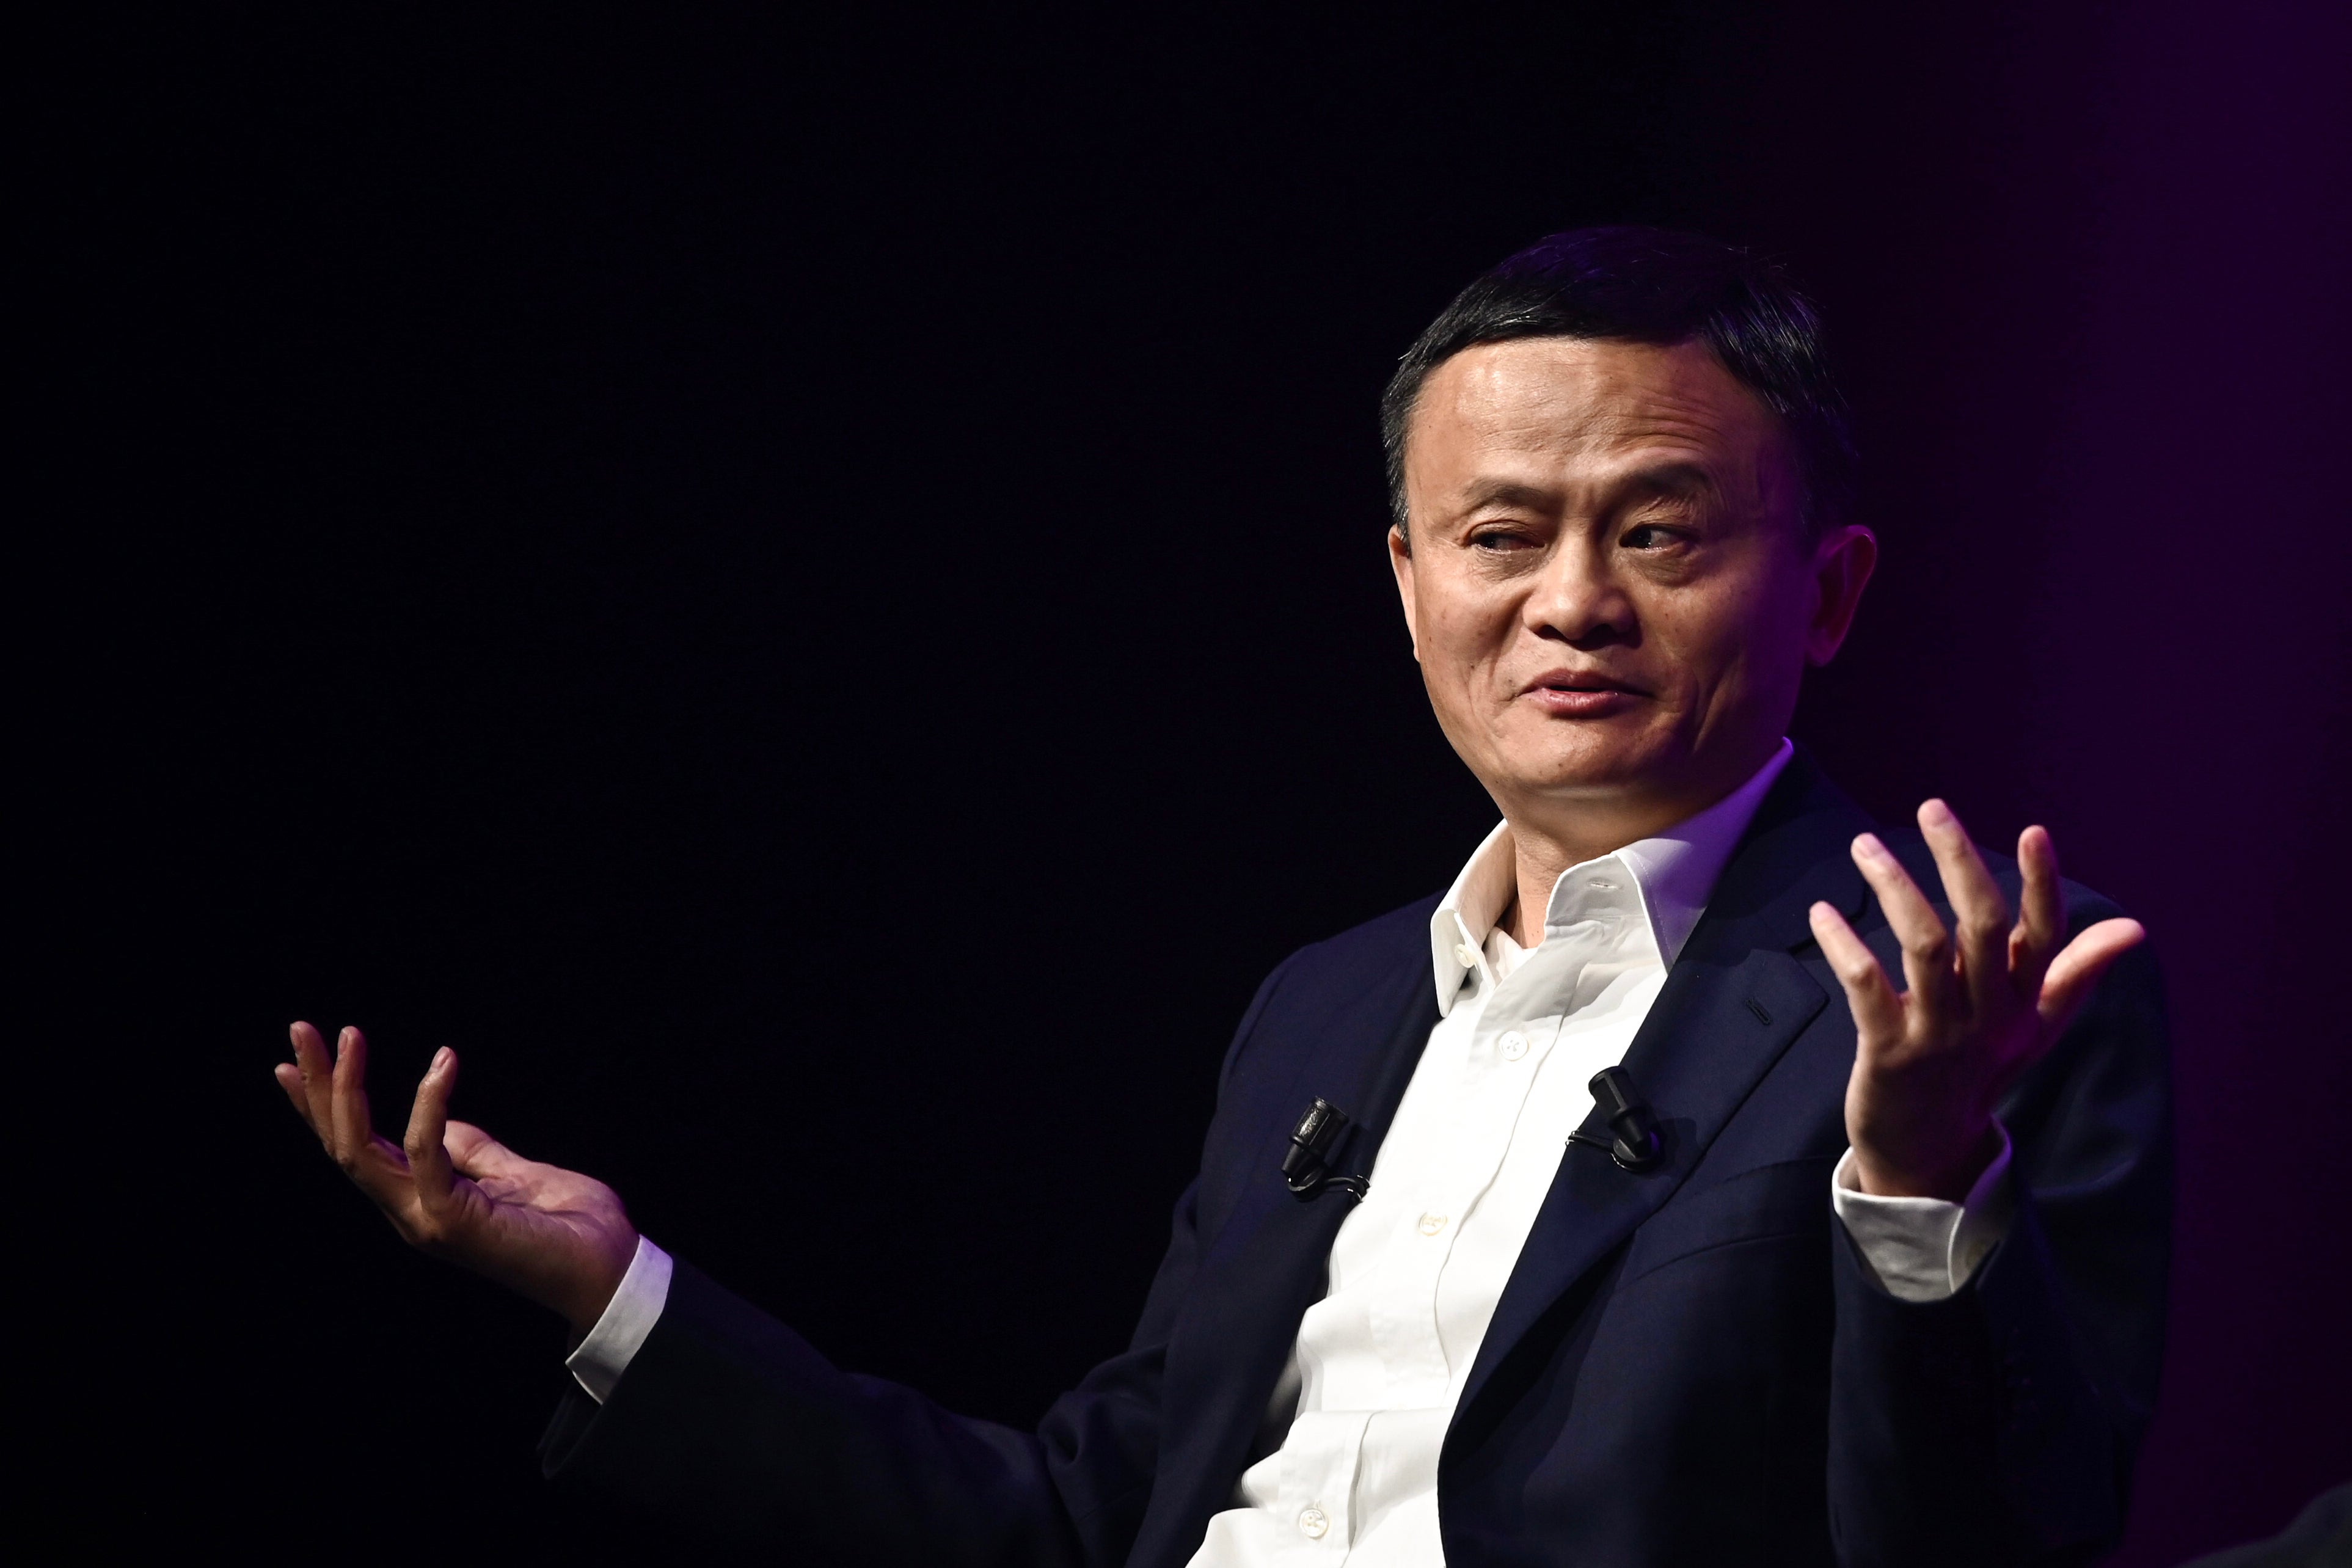 File photo: Jack Ma, CEO of Chinese e-commerce giant Alibaba, gestures as he speaks during a visit to Paris in 2019